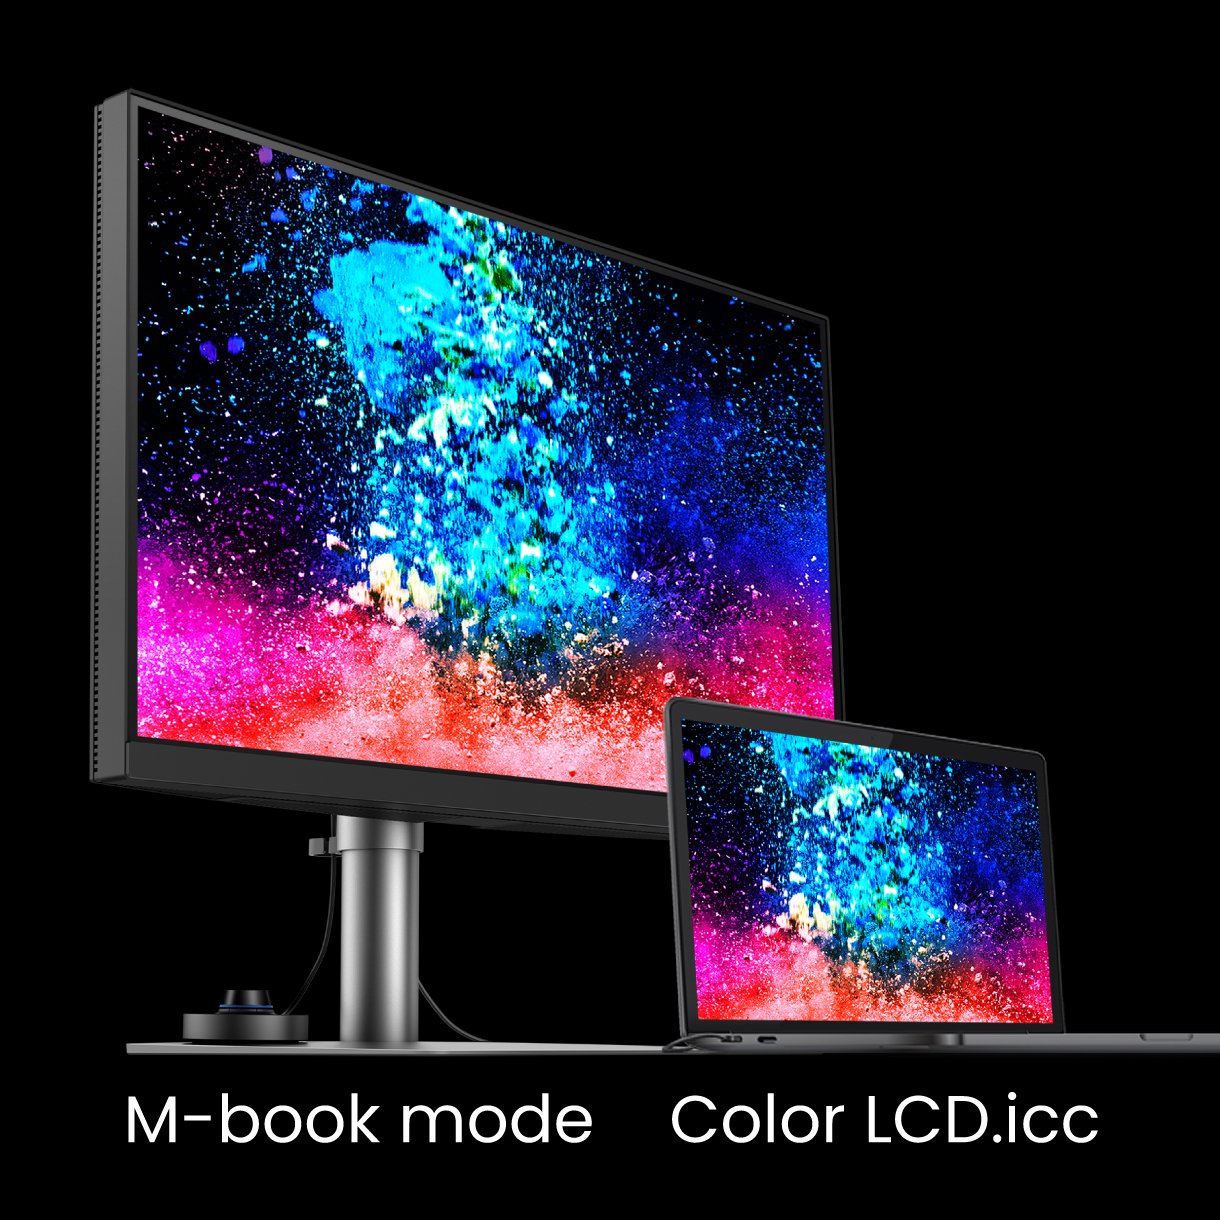 BenQ PD2725U ships from the factory with default color settings that perfectly match Mac® and MacBook® Pro laptop colors and BenQ exclusive M-Book mode on the PD2725U provides active color syncing between Macs and the monitor while you work.